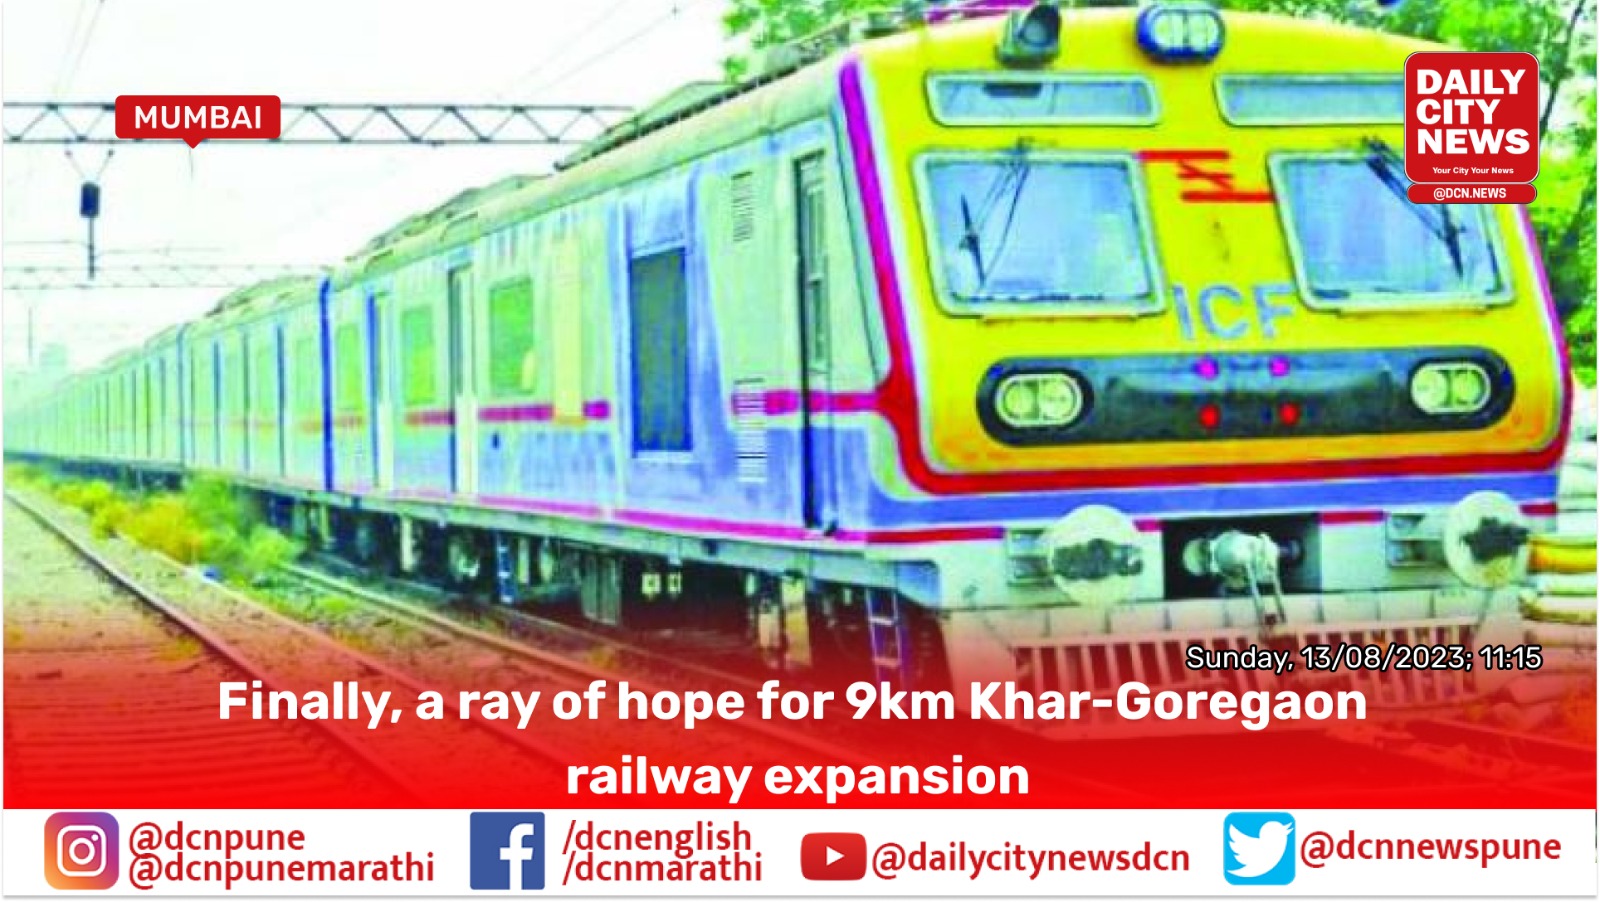  Finally, a ray of hope for 9km Khar-Goregaon railway expansion